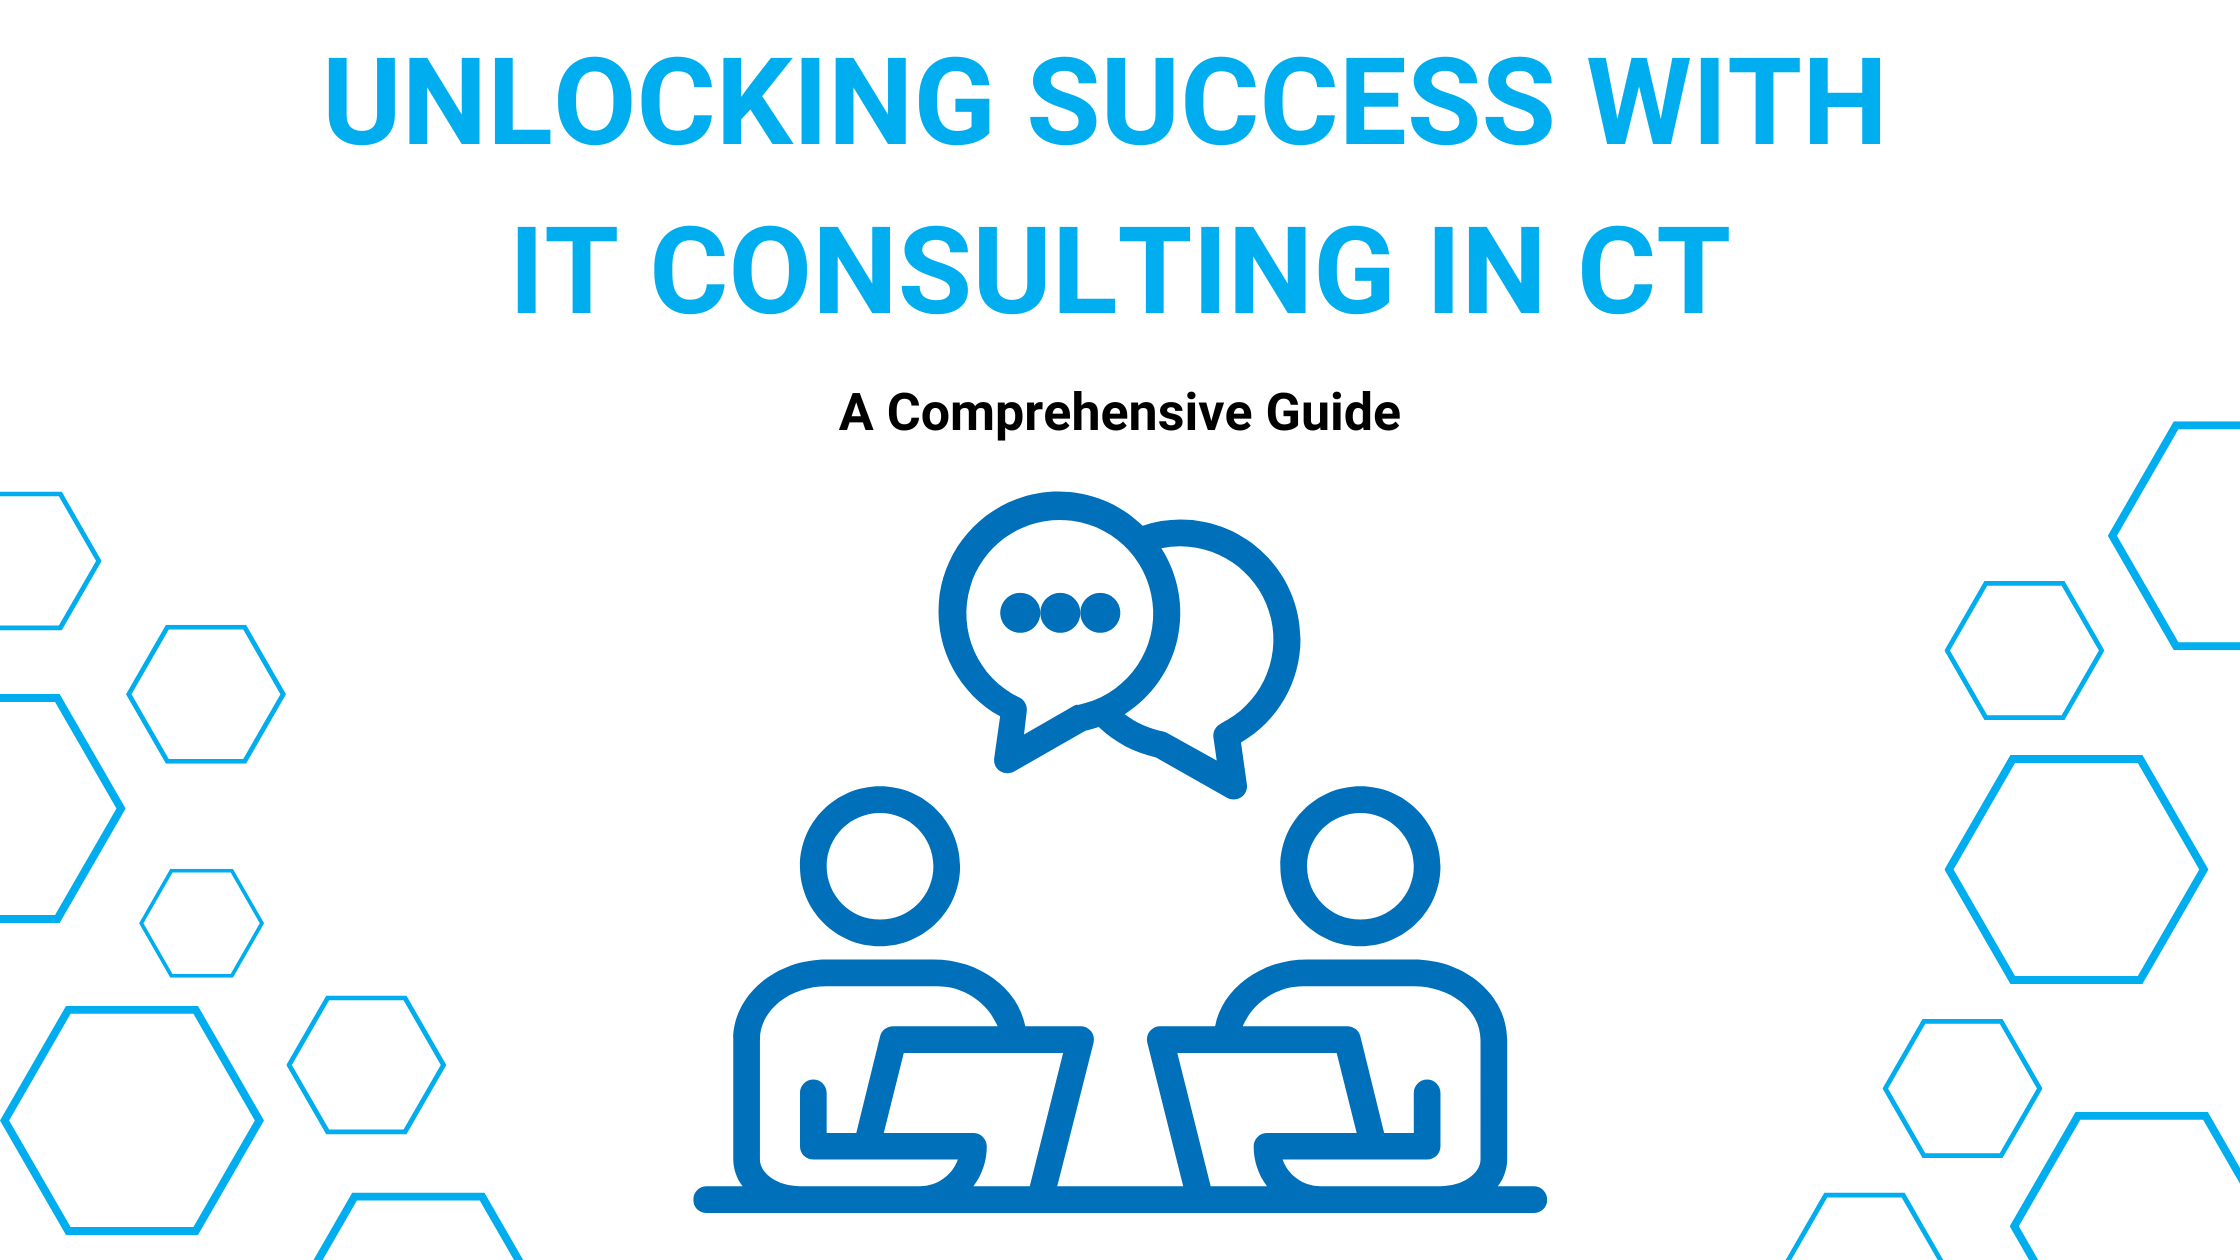 Unlocking Success with IT Consulting in CT: A Comprehensive Guide